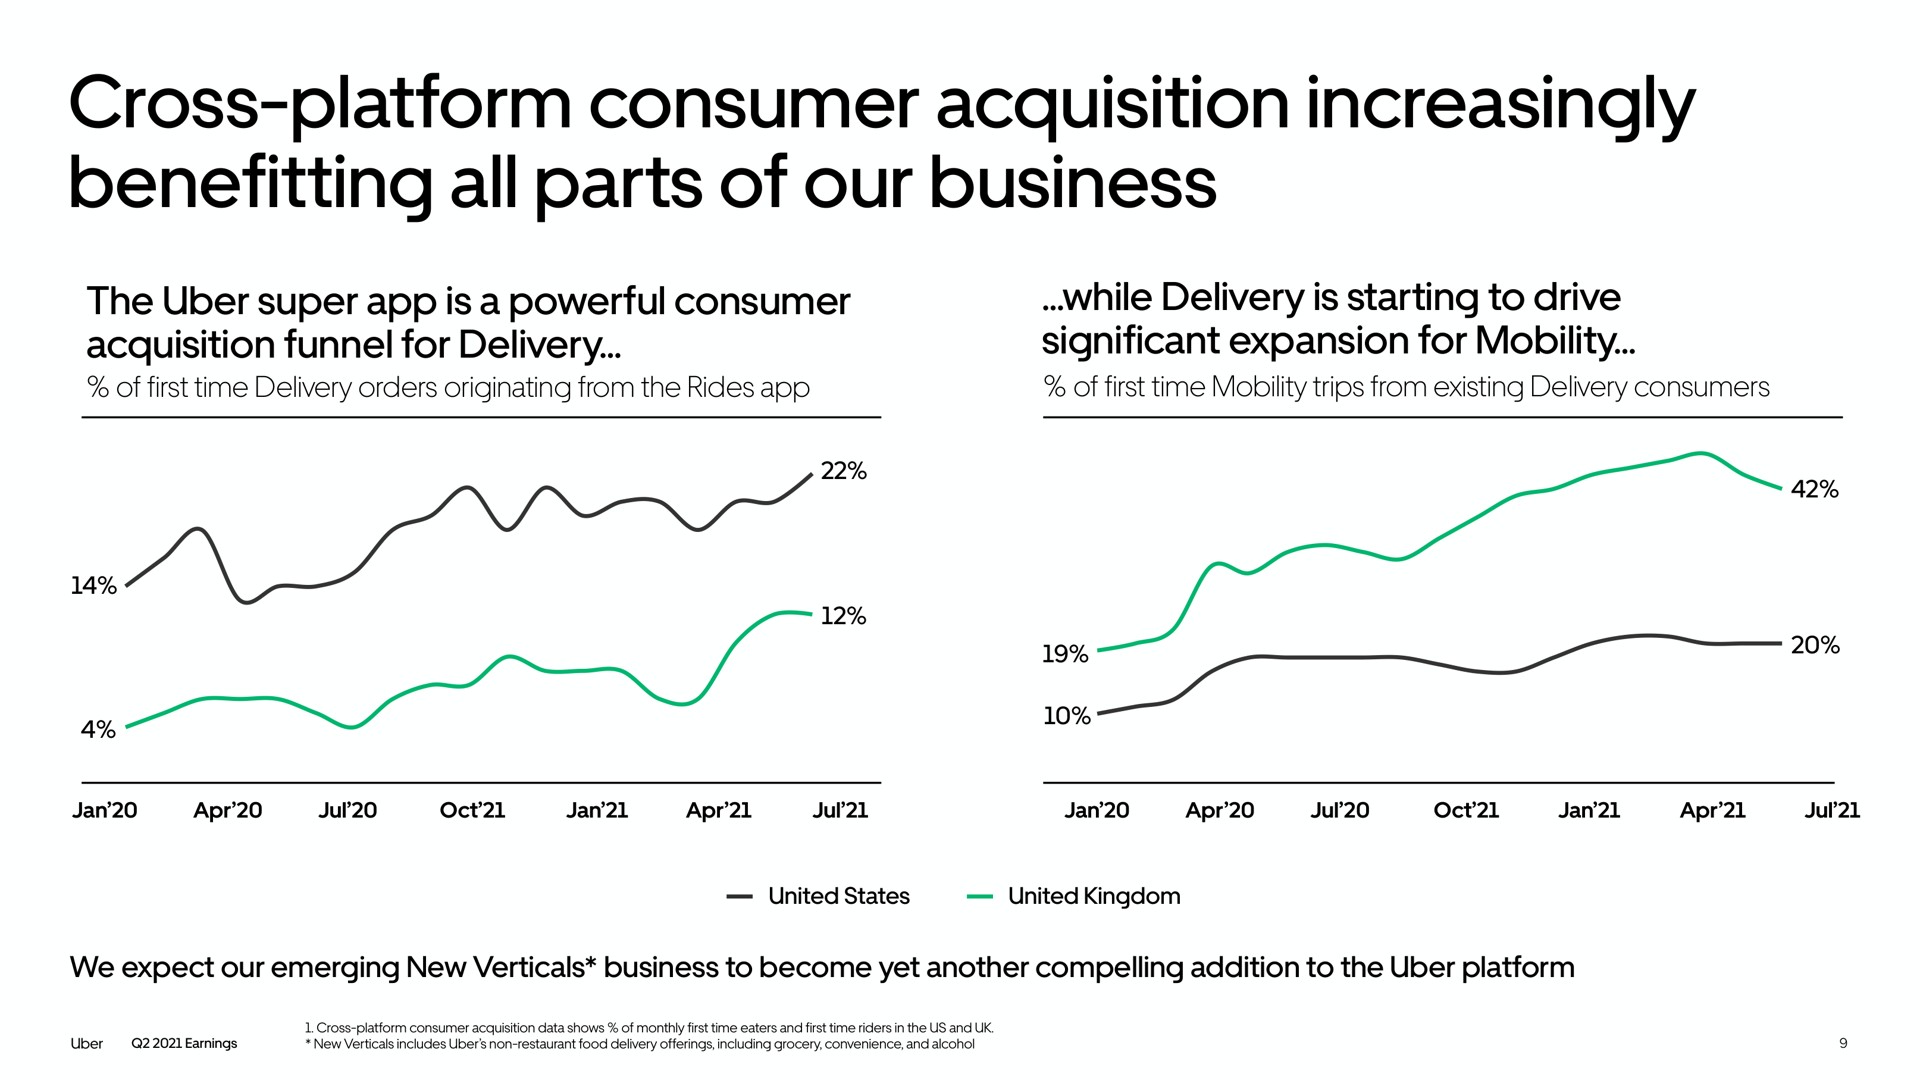 cross platform consumer acquisition increasingly benefitting all parts of our business | Uber